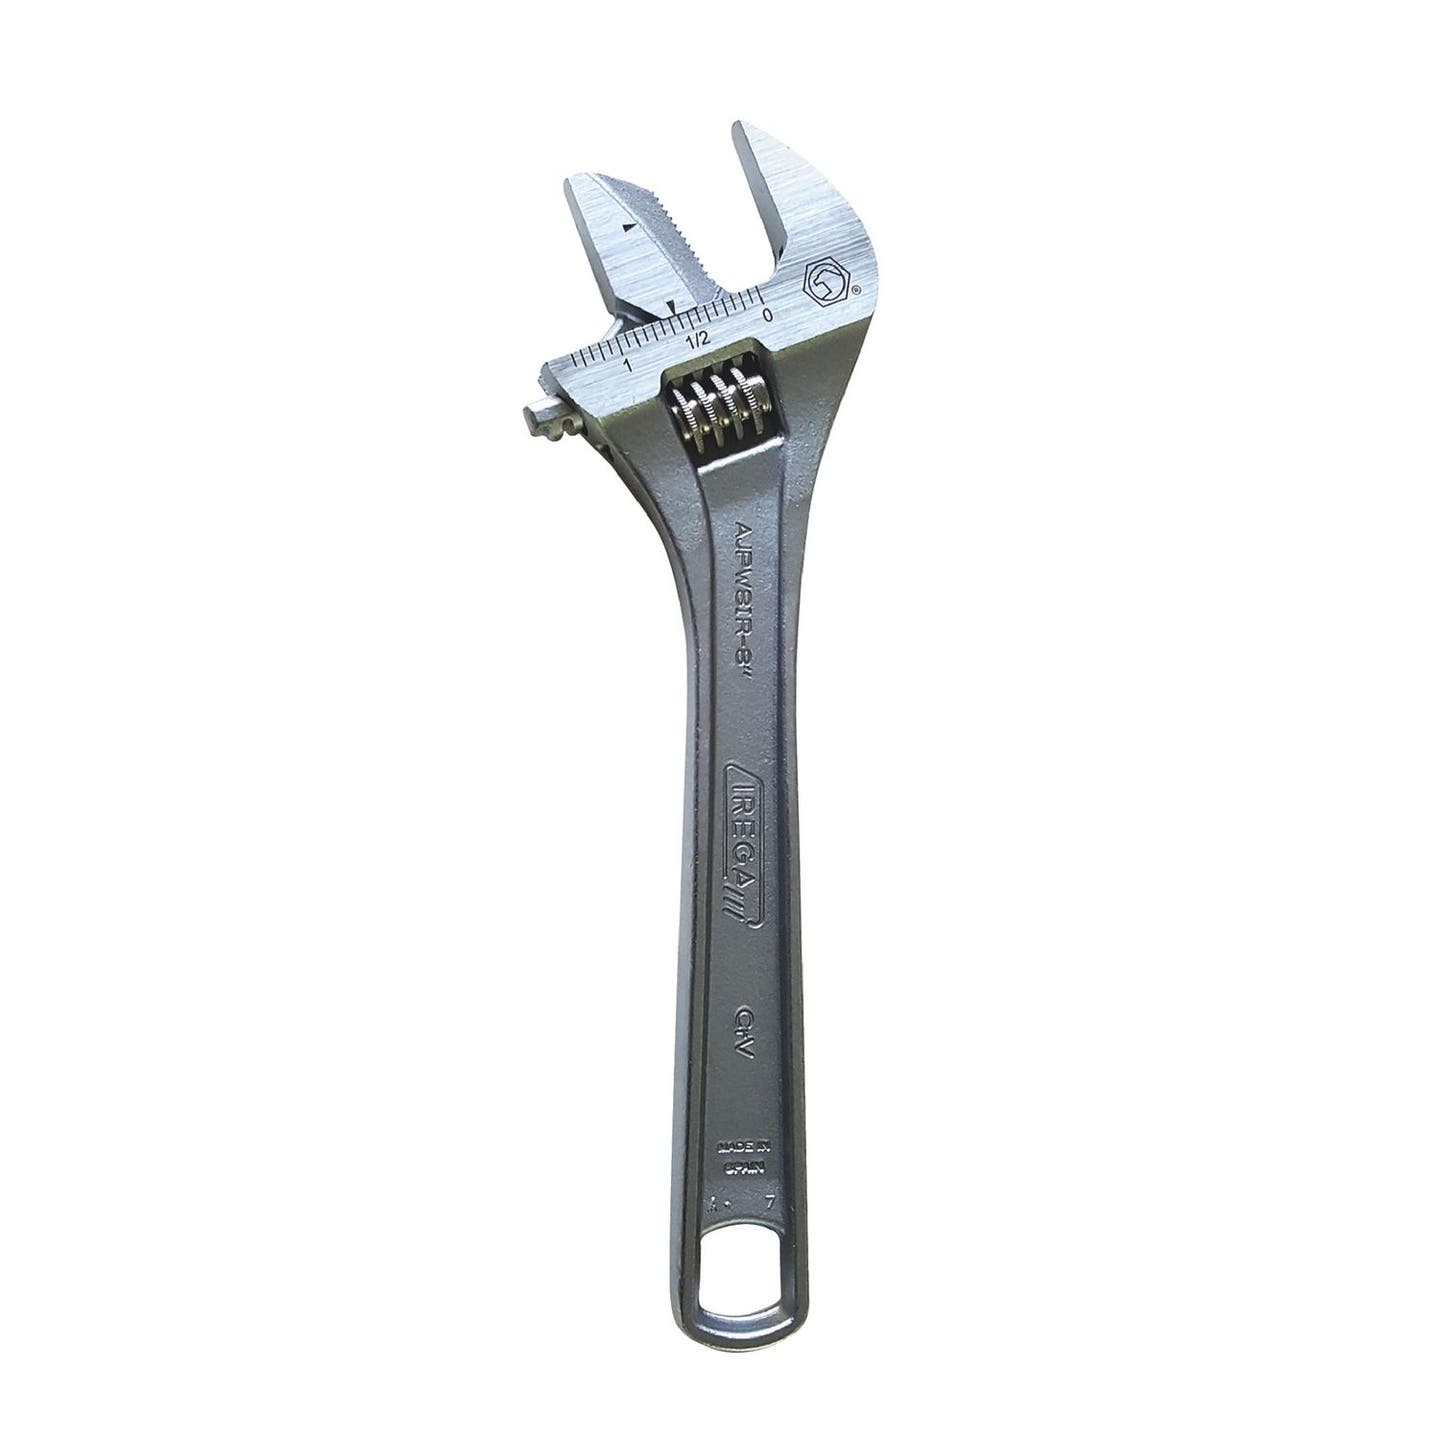 8" REVERSIBLE ADJUSTABLE WRENCH